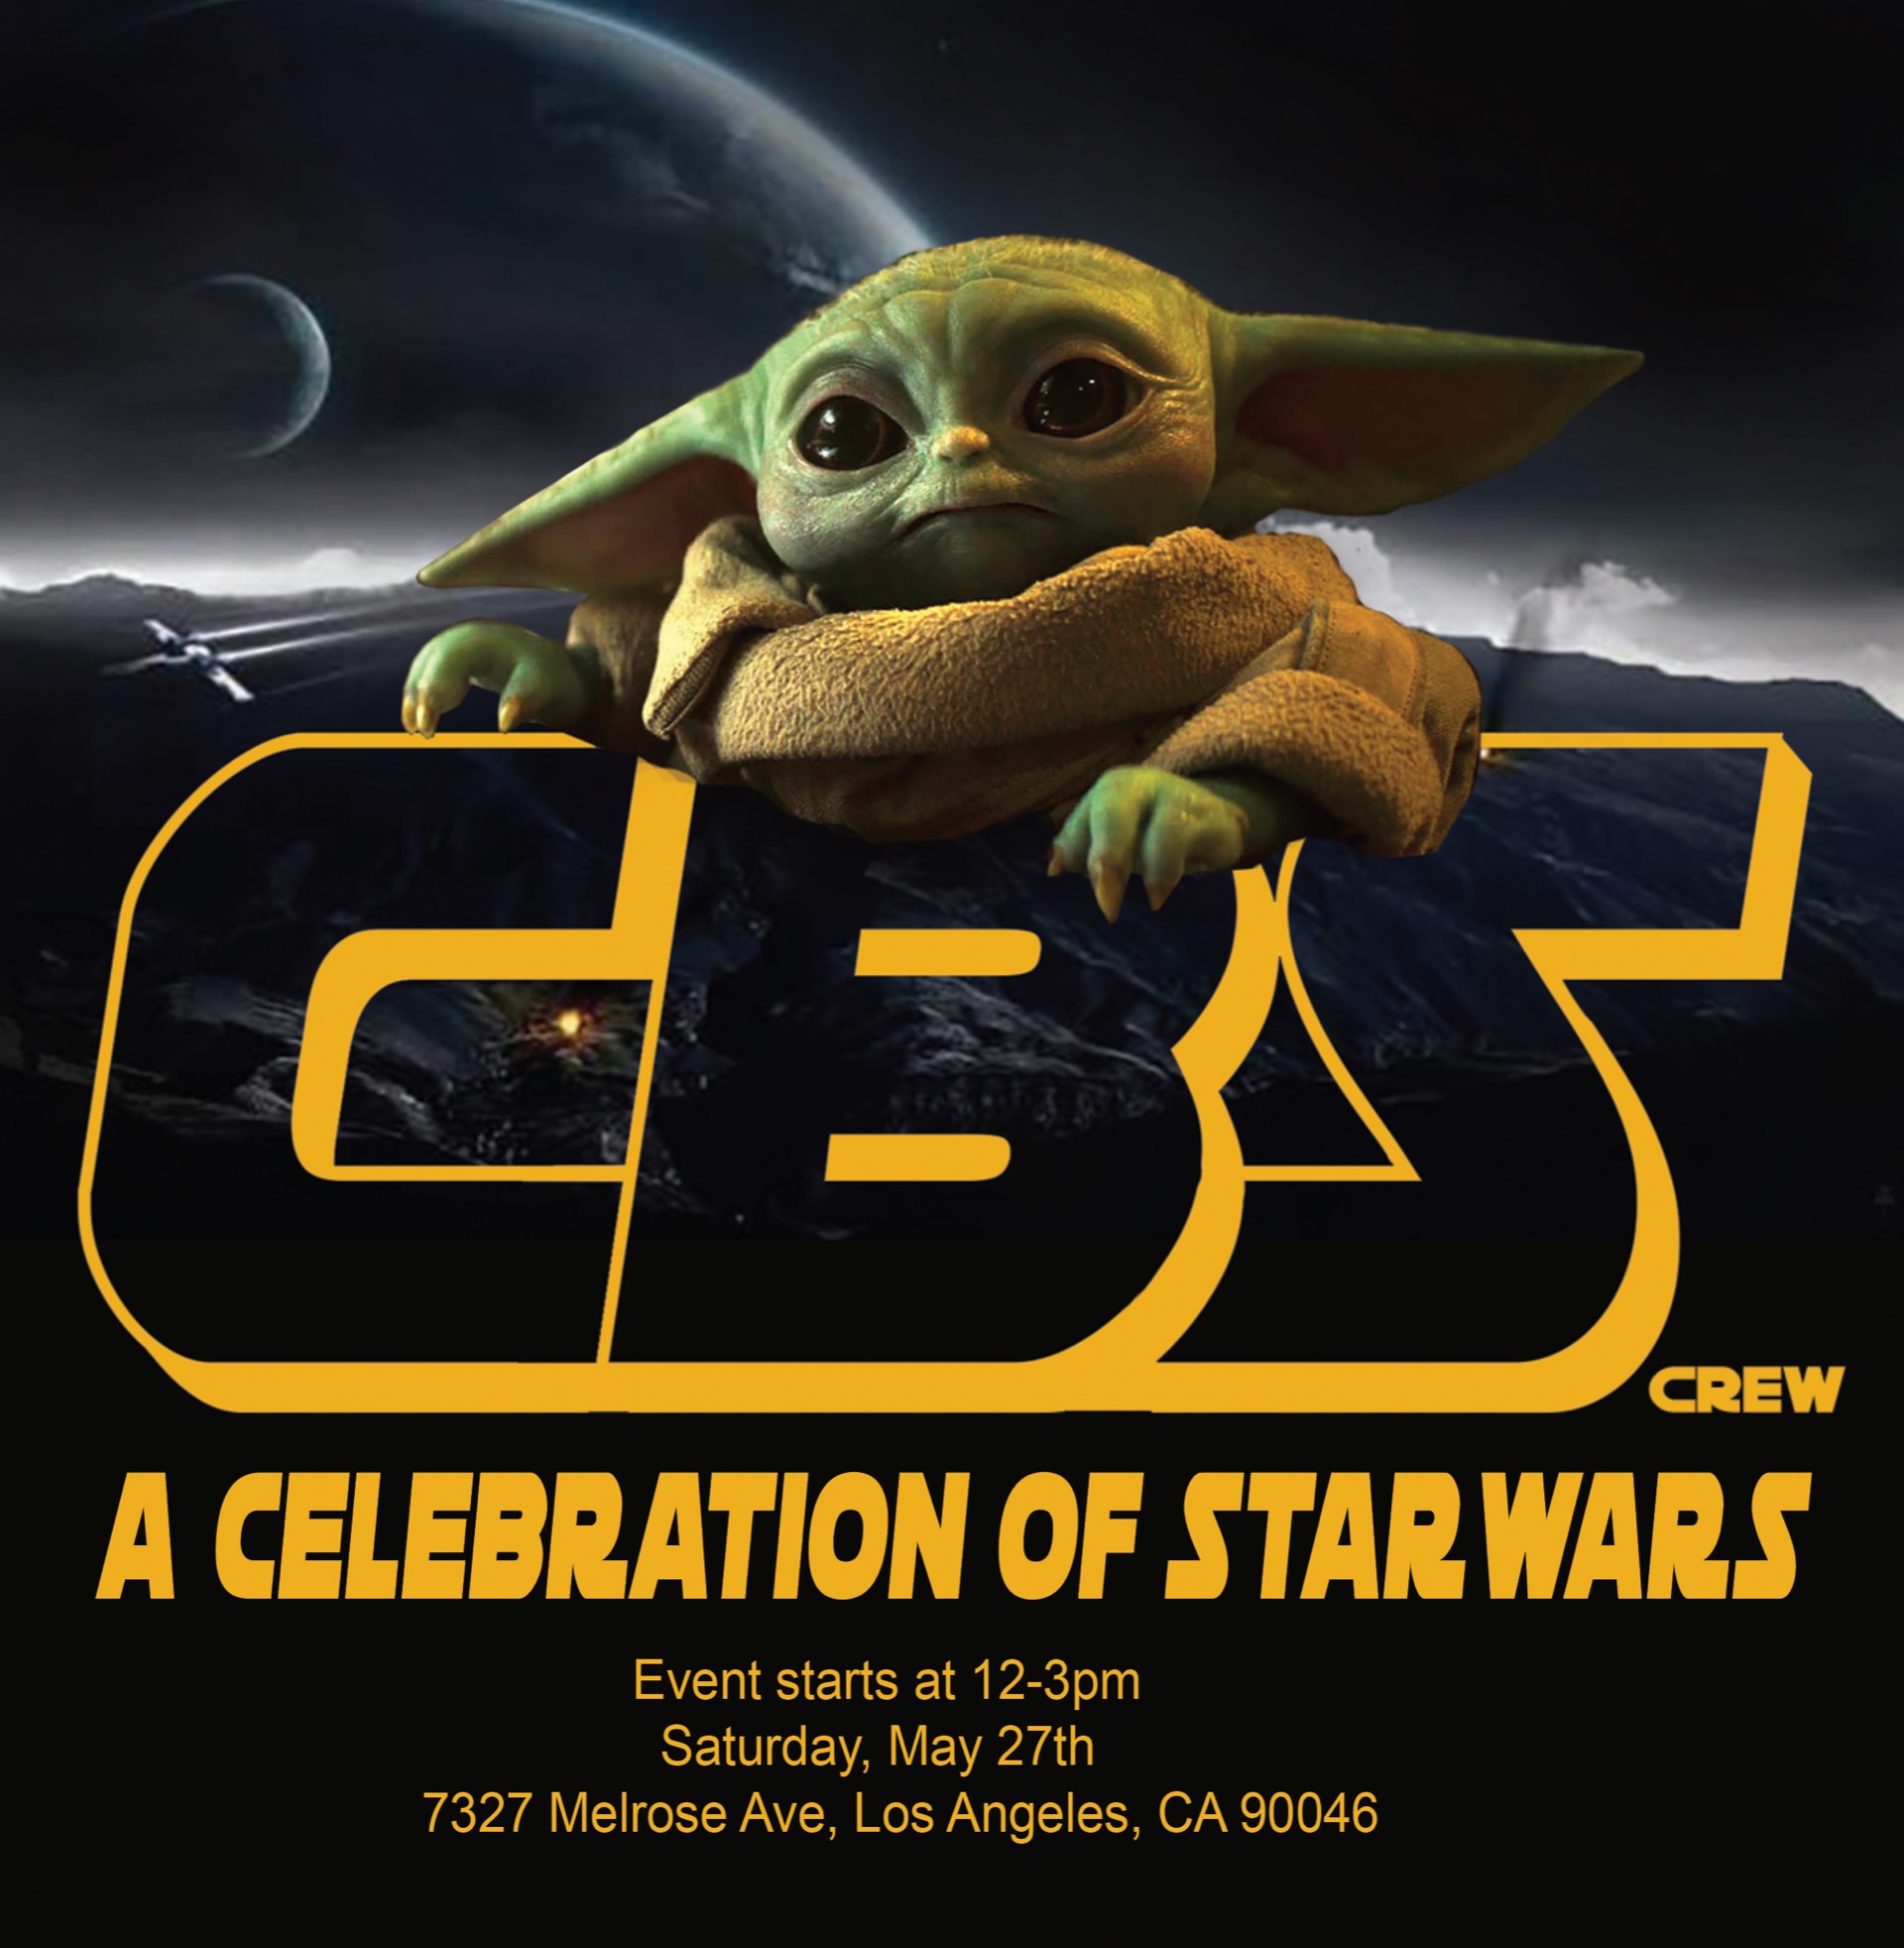 An image of Baby Yoda on the promotional poster for the Star Wars Takeover on Melrose.